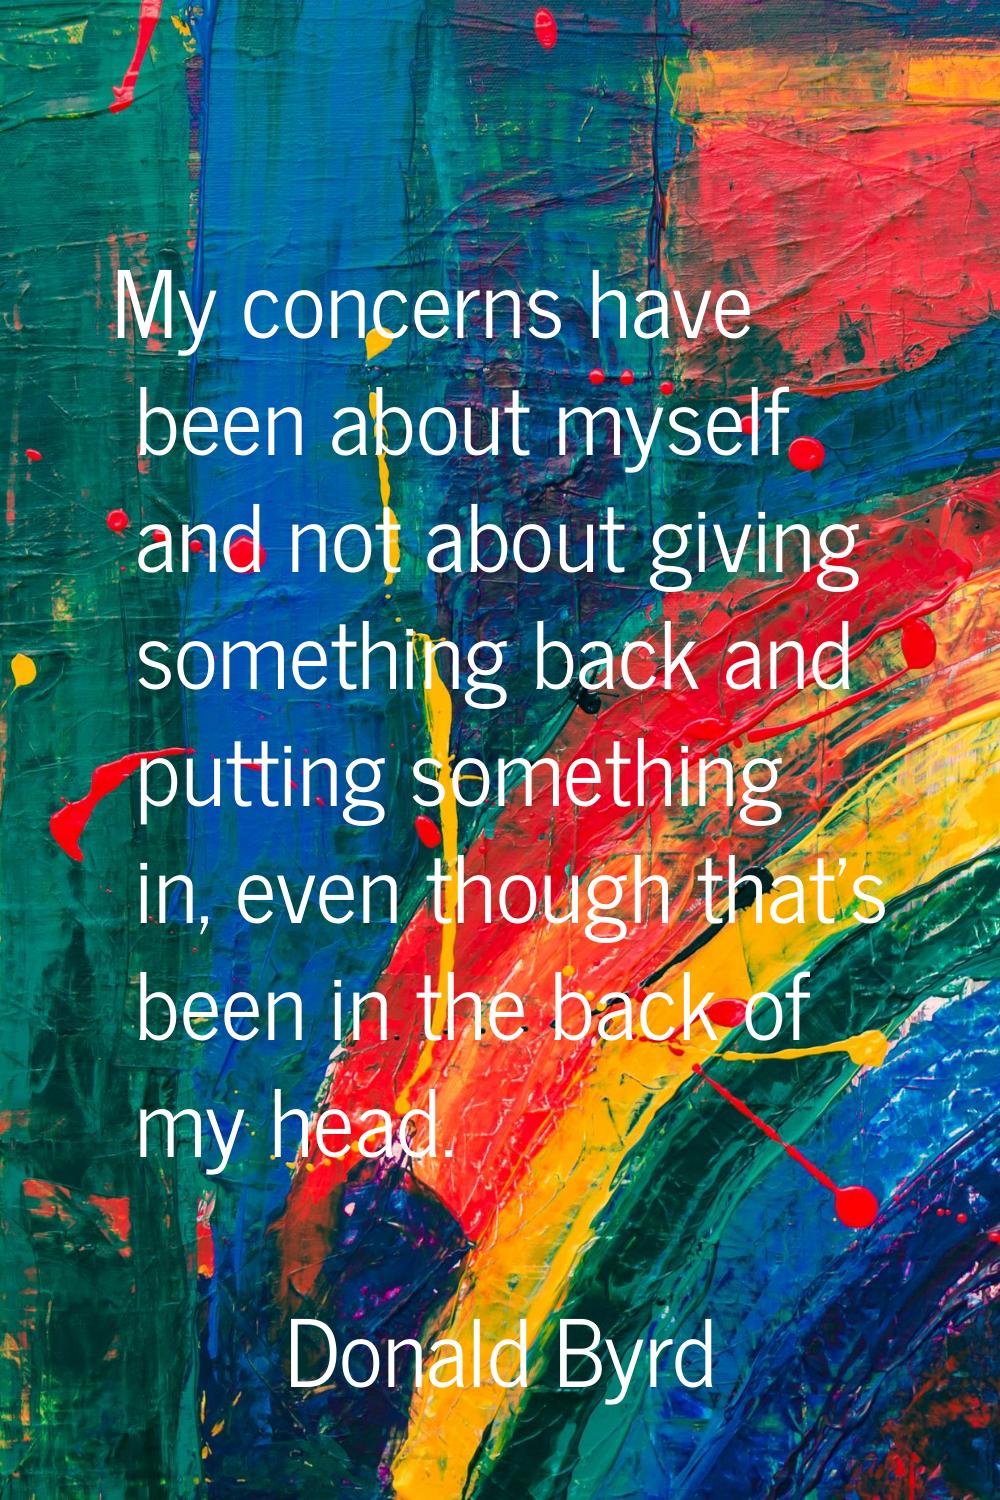 My concerns have been about myself and not about giving something back and putting something in, ev